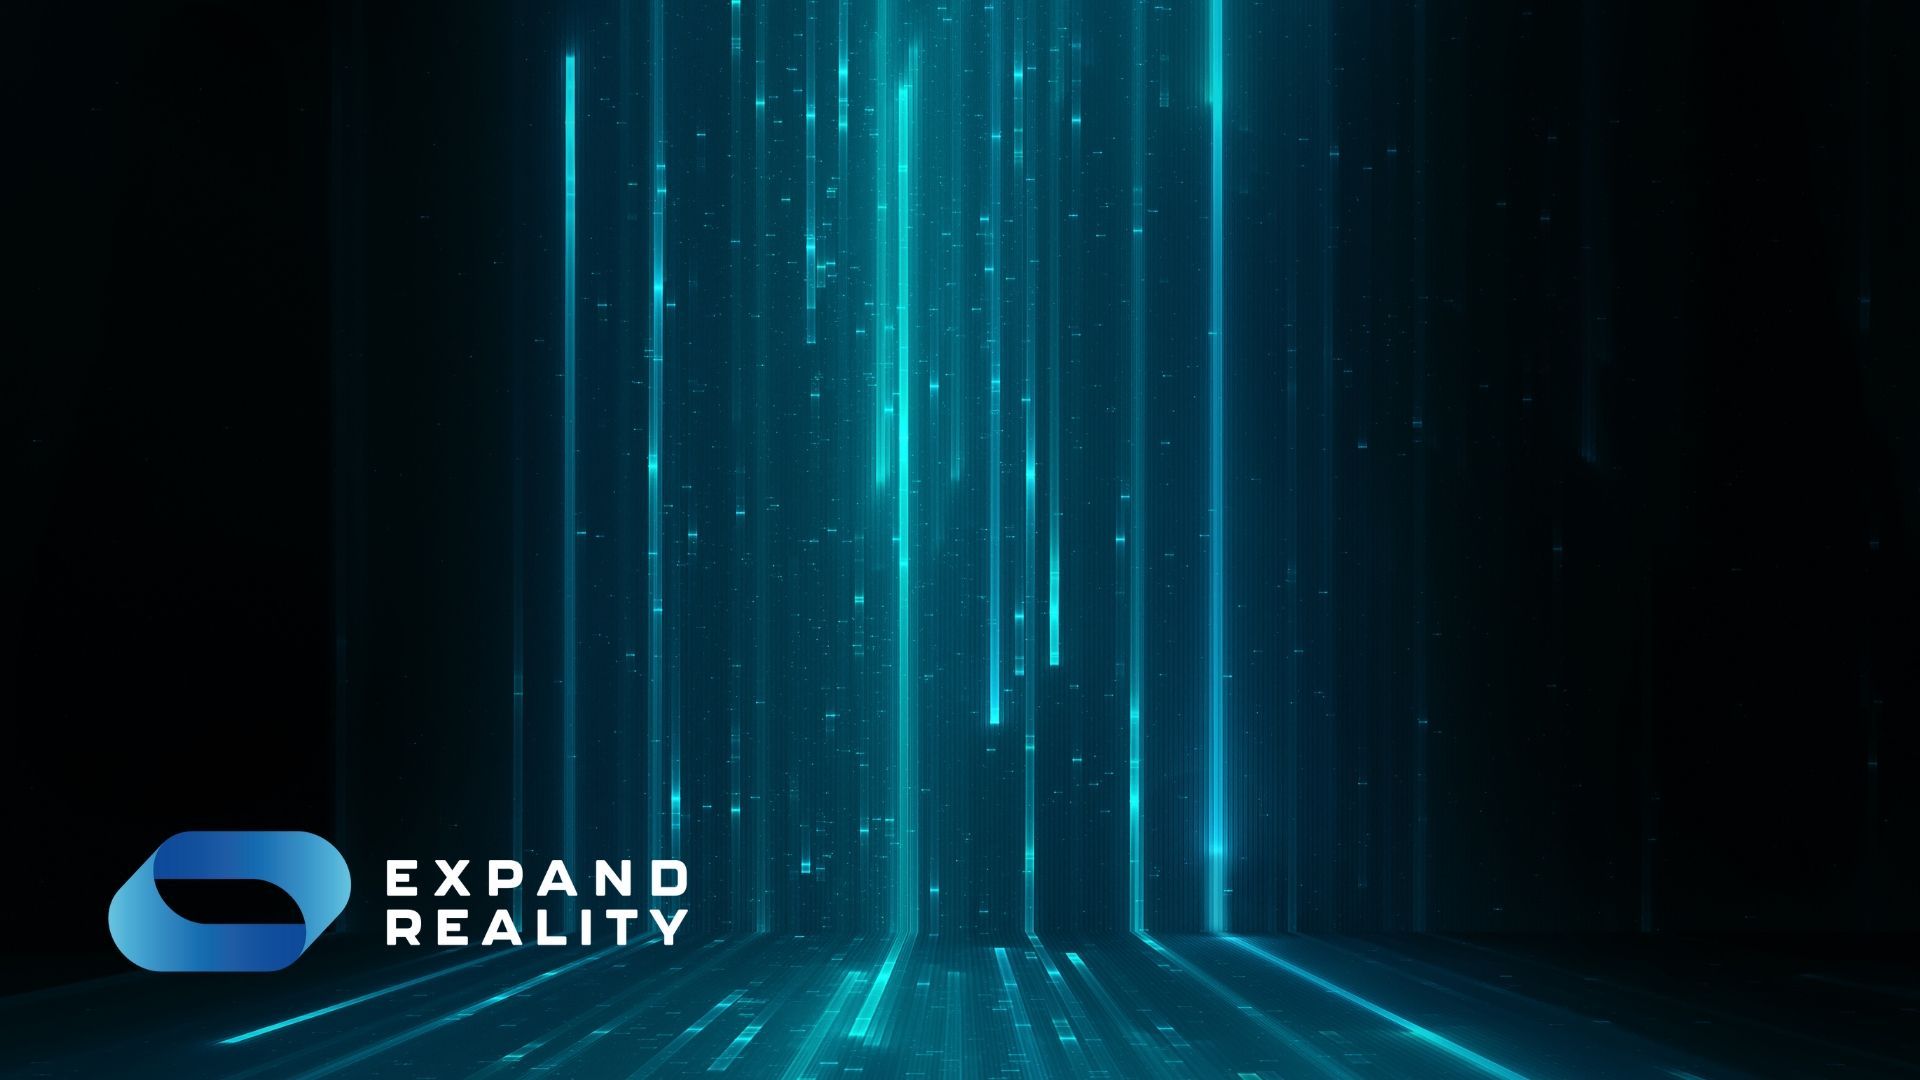 Multisensory XR promises unprecedented levels of immersion. But what is it, and how close are we to achieving it? Find out in our guide.